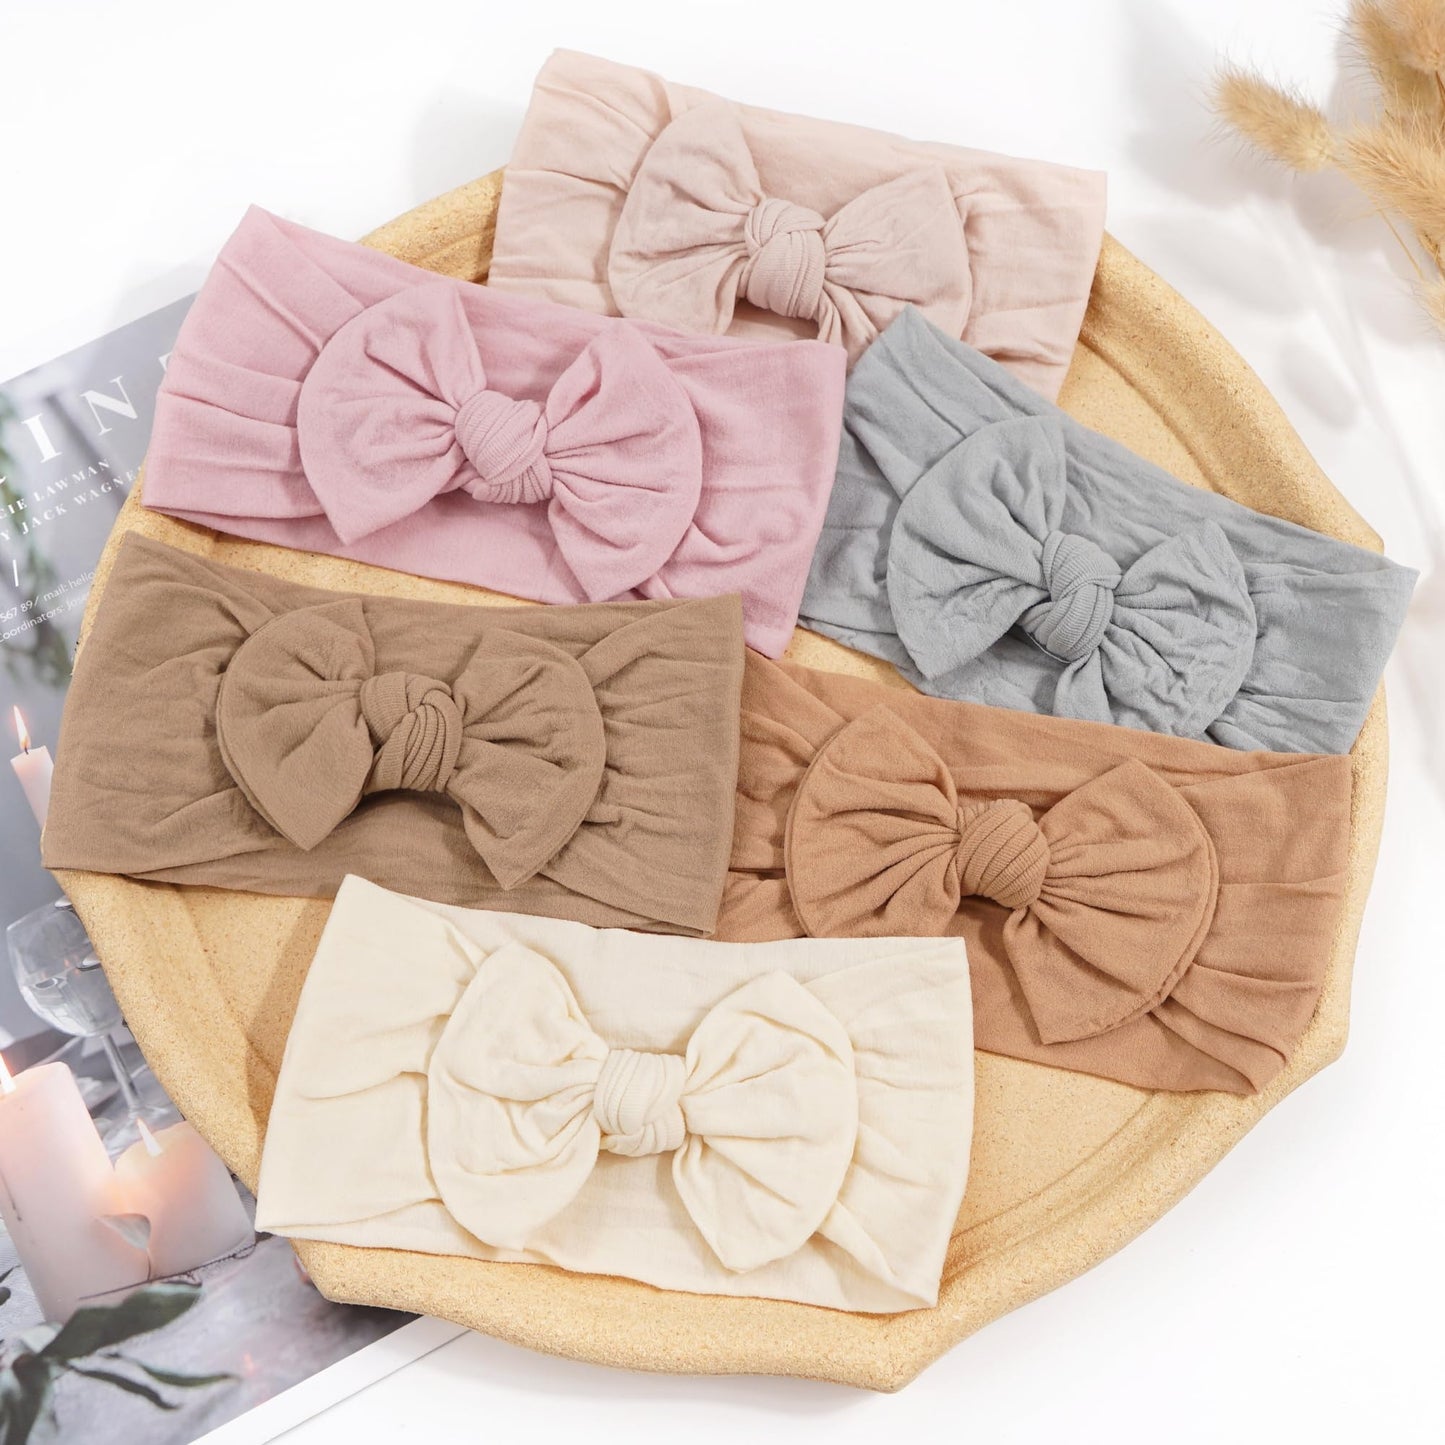 CELLOT 12 Colors Super Stretchy Soft Knot Baby Girl Headbands with Hair Bows Head Wrap For Newborn Baby Girls Infant Toddlers Tye Dye